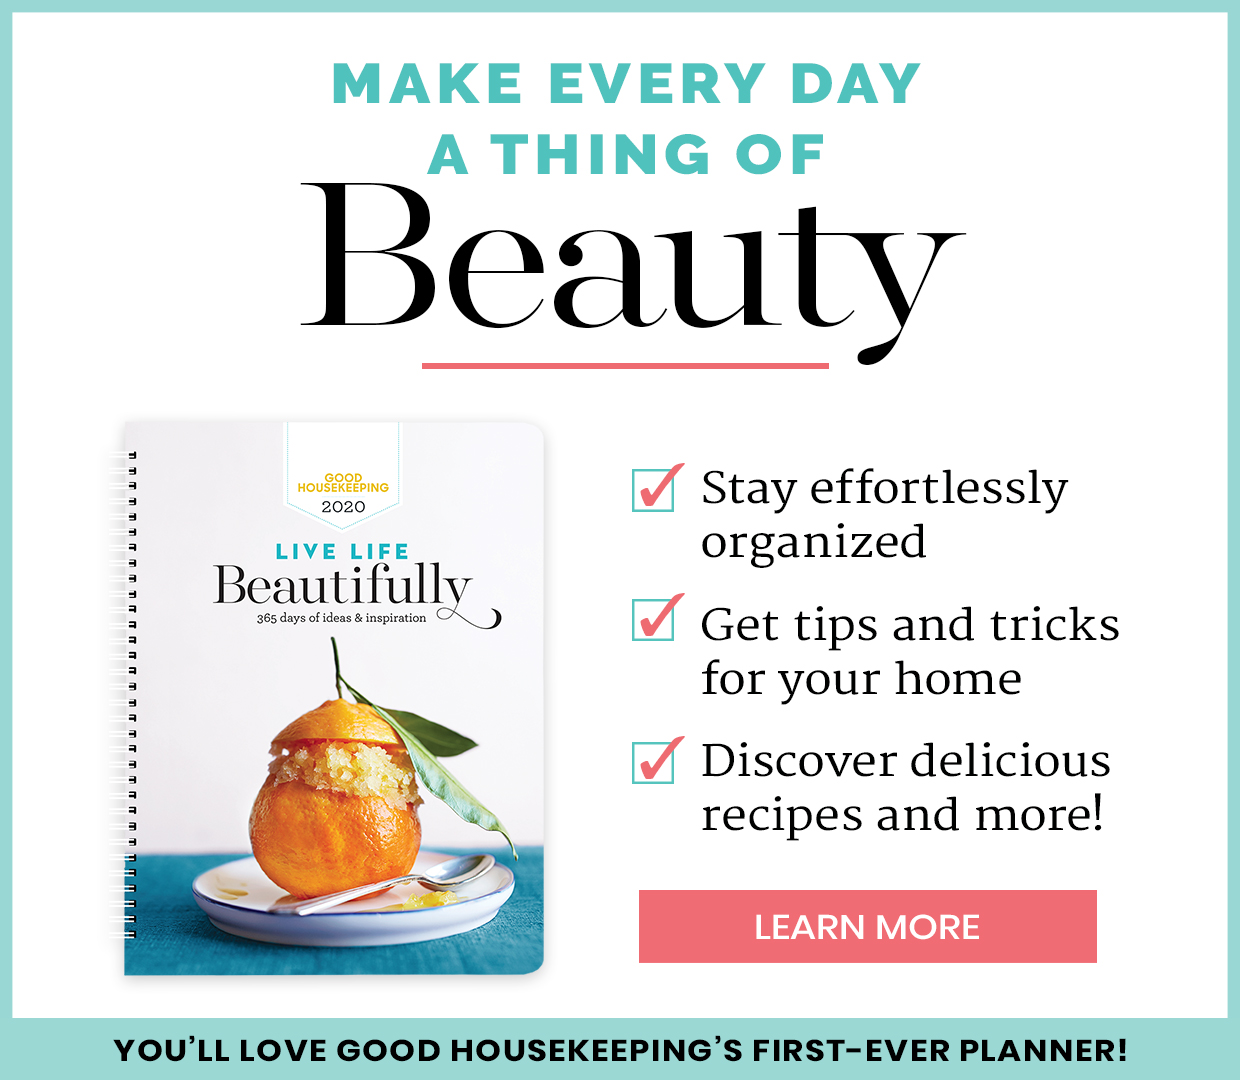 Introducing Good Housekeeping's first ever planner. Part weekly agenda, part happiness handbook, Live Life Beautifully is the essential guide to a year well-lived.